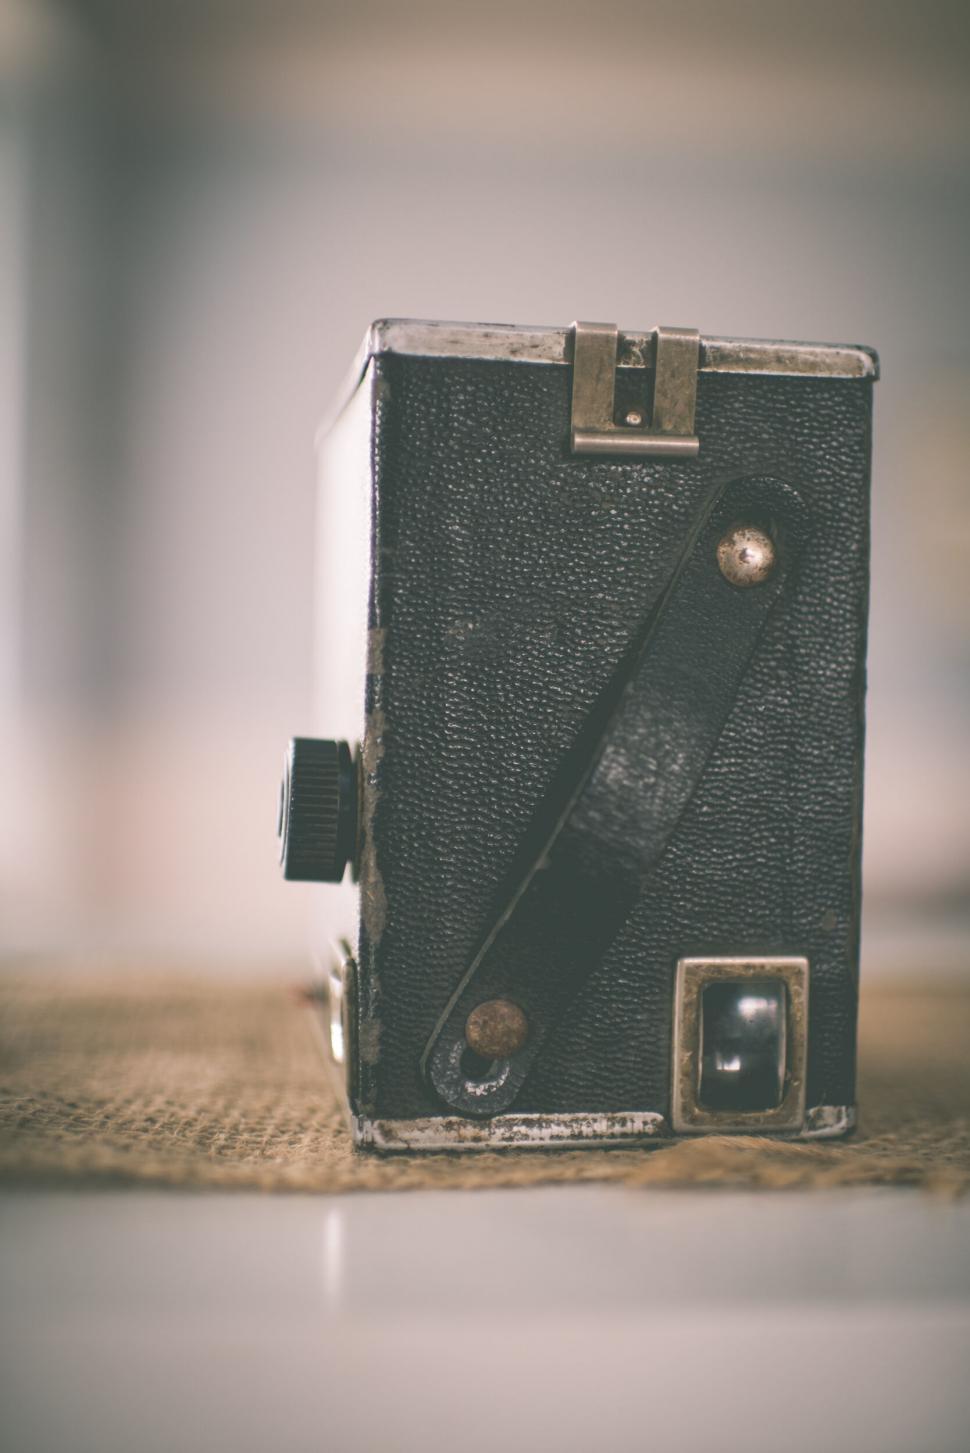 Free Image of Retro black box camera with leather cover 